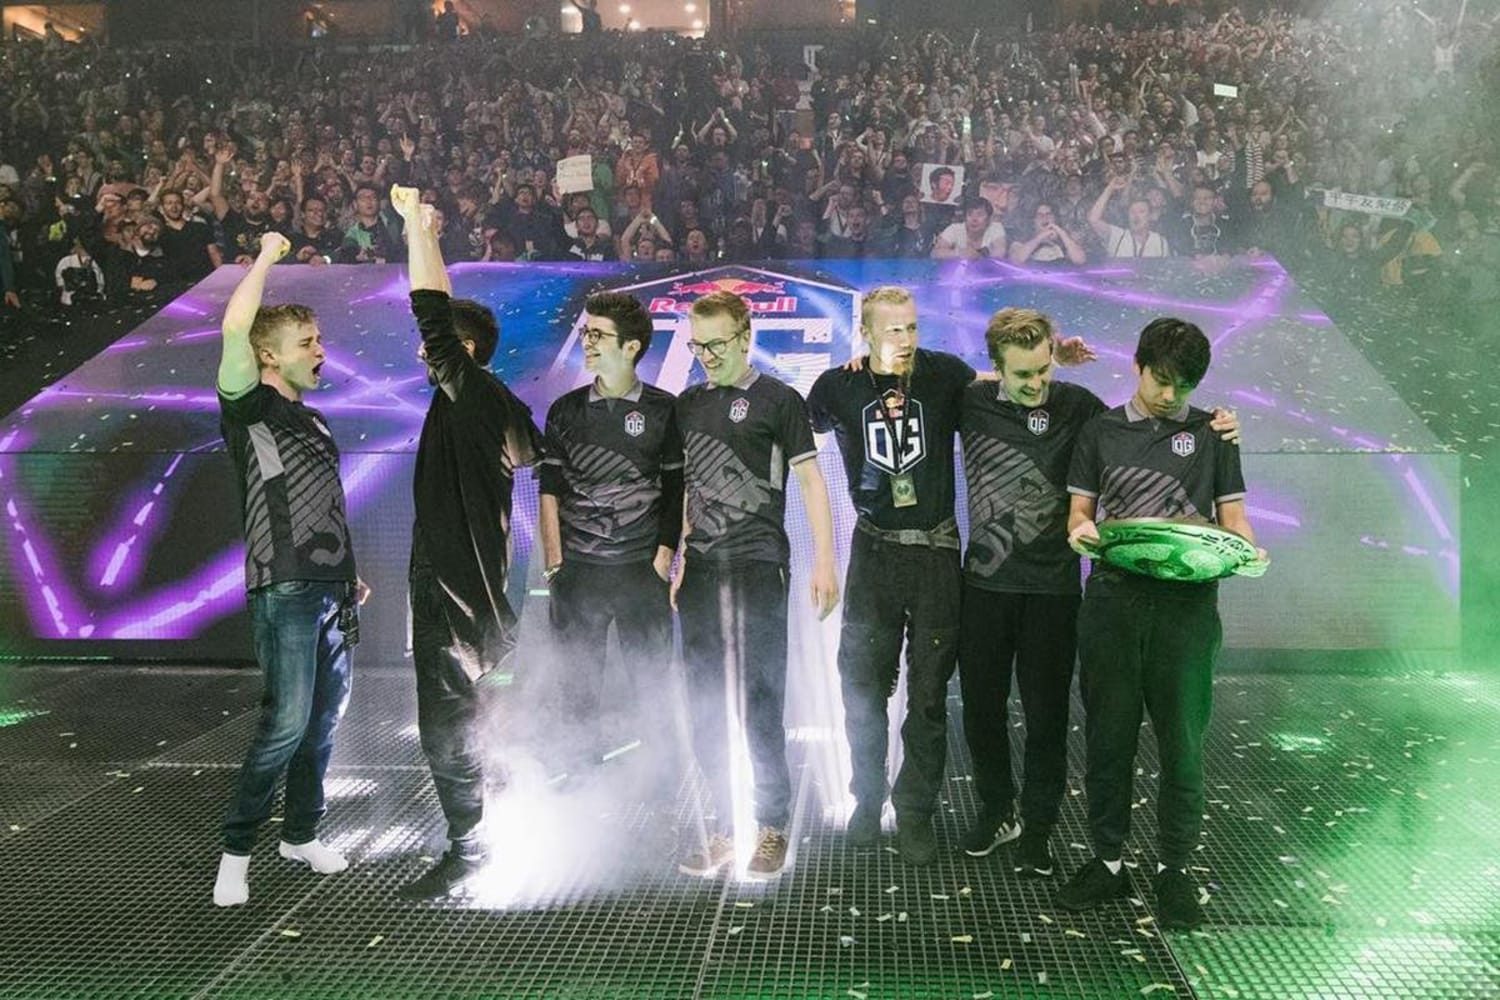 OG win TI8 and the biggest prize in esports